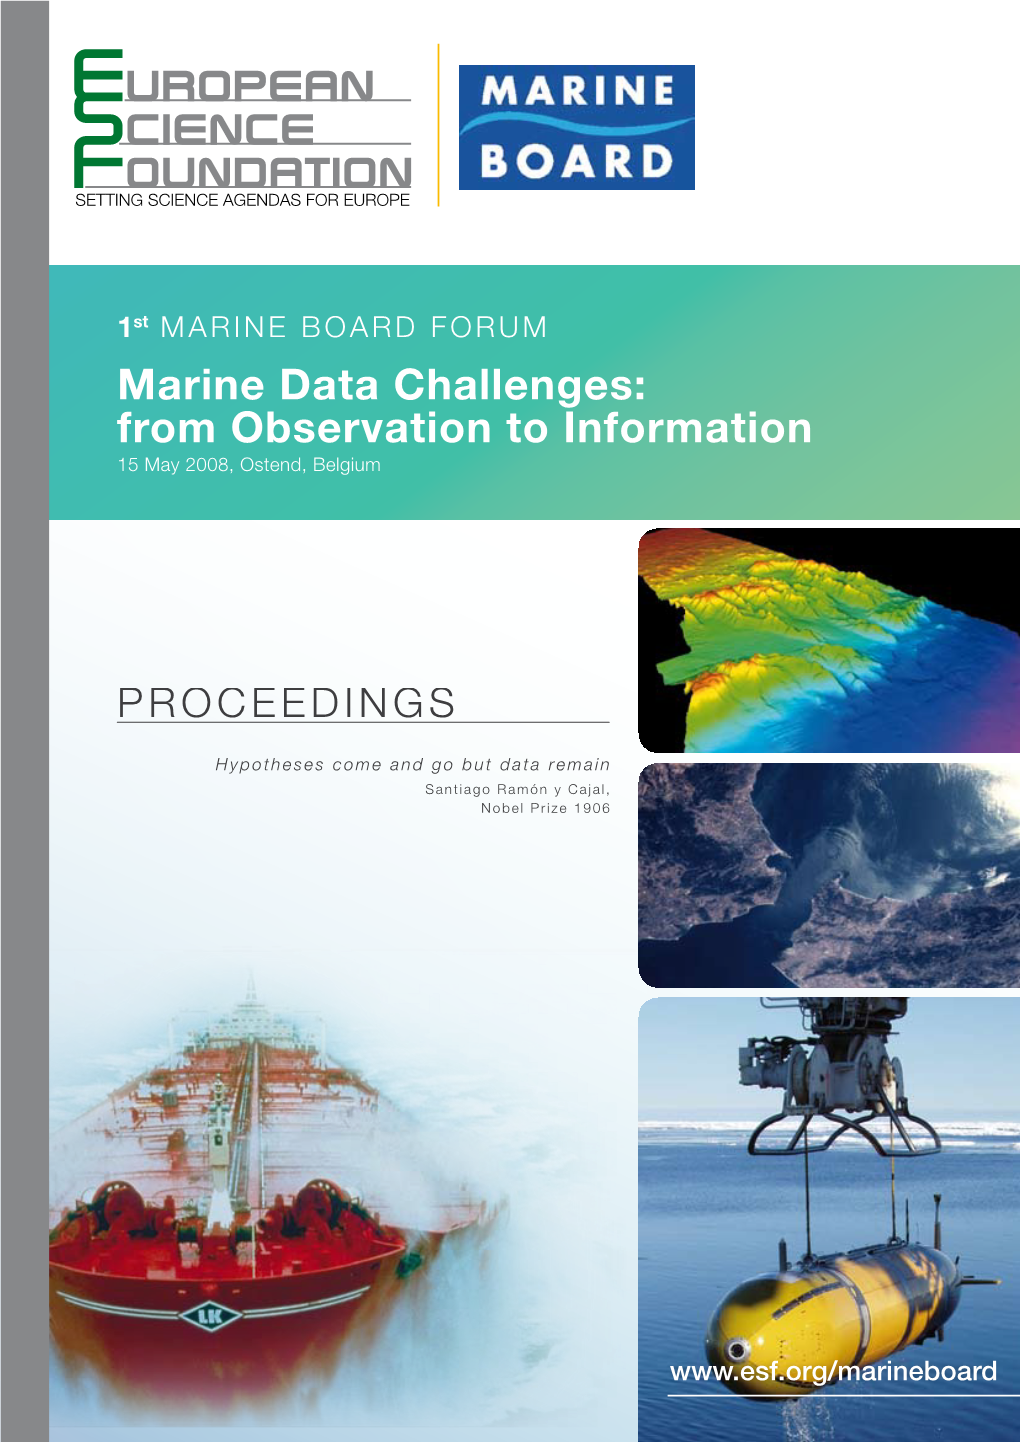 Marine Data Challenges: from Observation to Information 15 May 2008, Ostend, Belgium